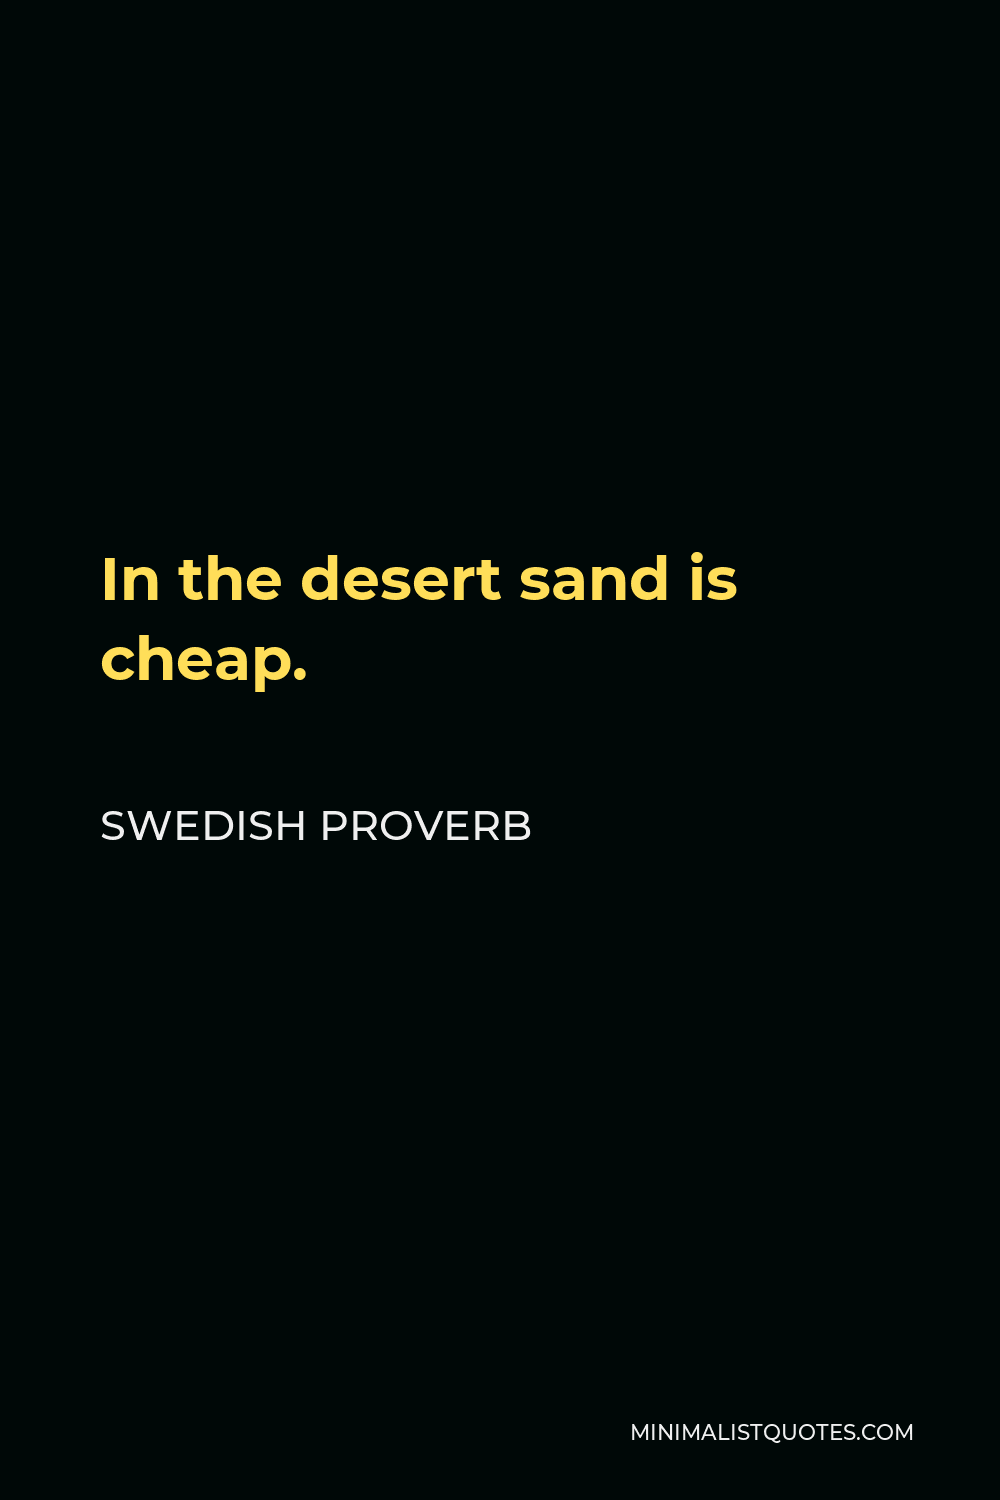 Swedish Proverb Quote - In the desert sand is cheap.